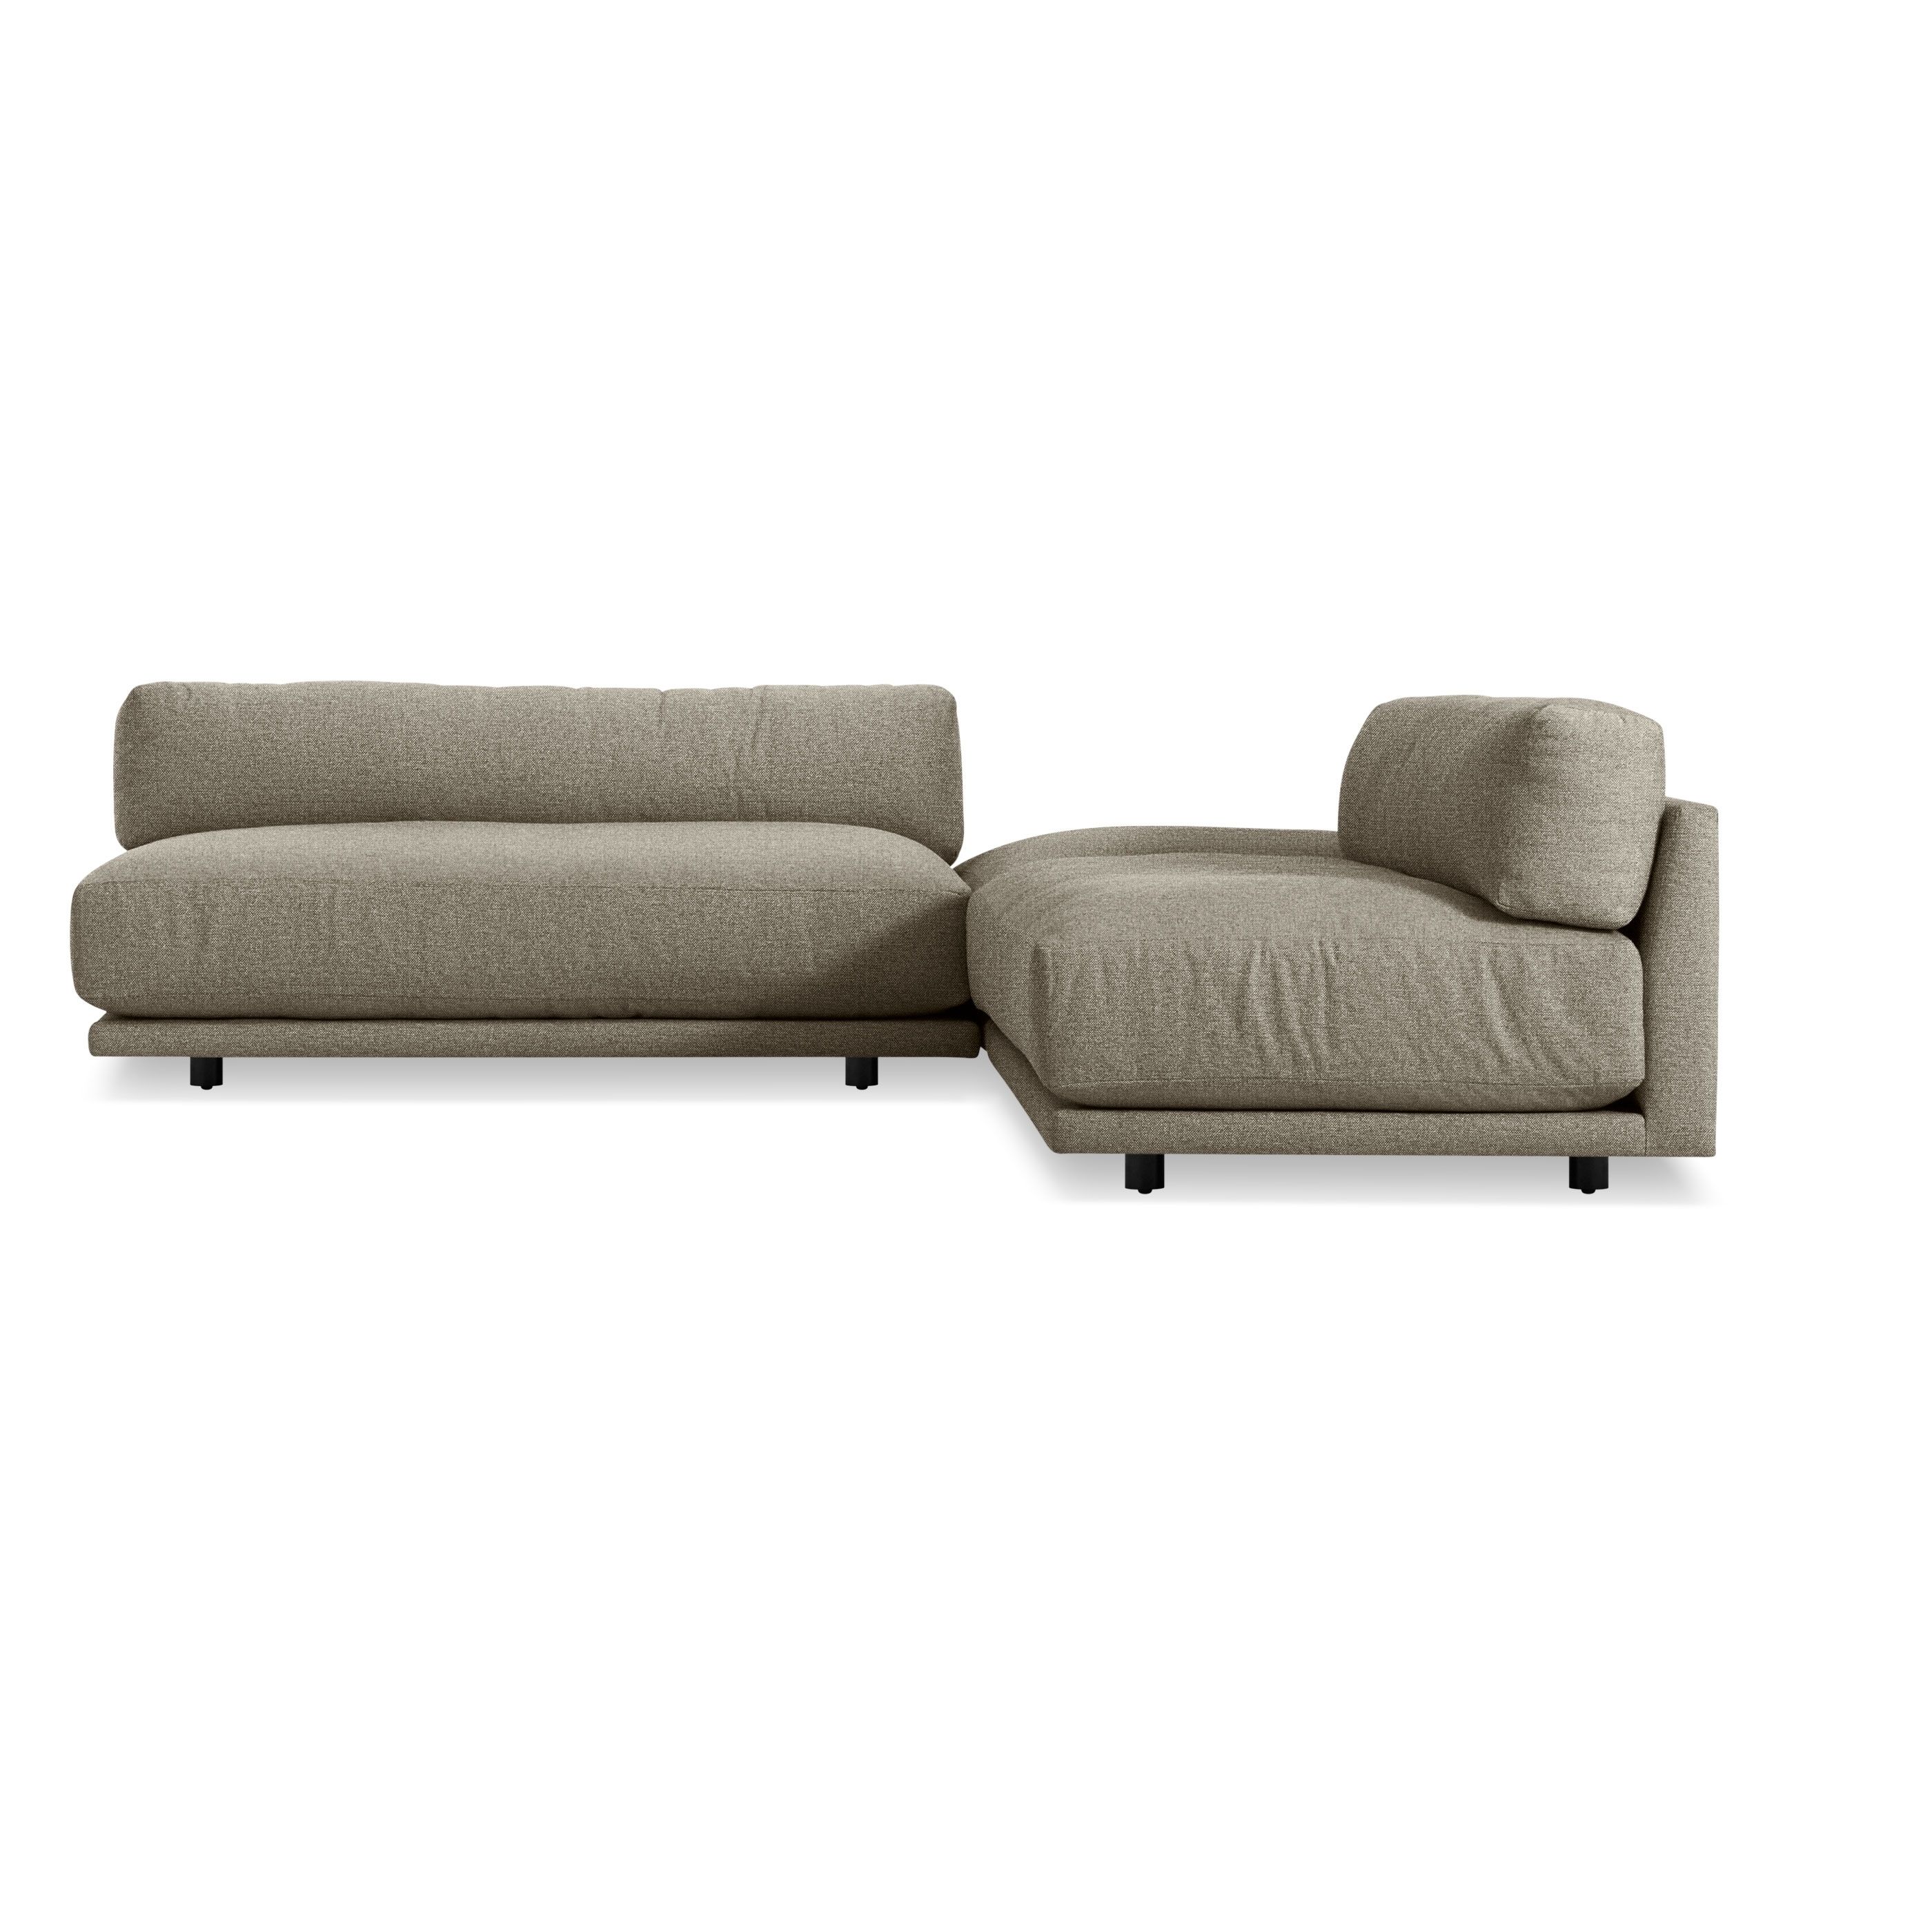 Sunday Small L Sectional Sofa | Blu Dot Pertaining To Newfoundland Sectional Sofas (Photo 9 of 10)